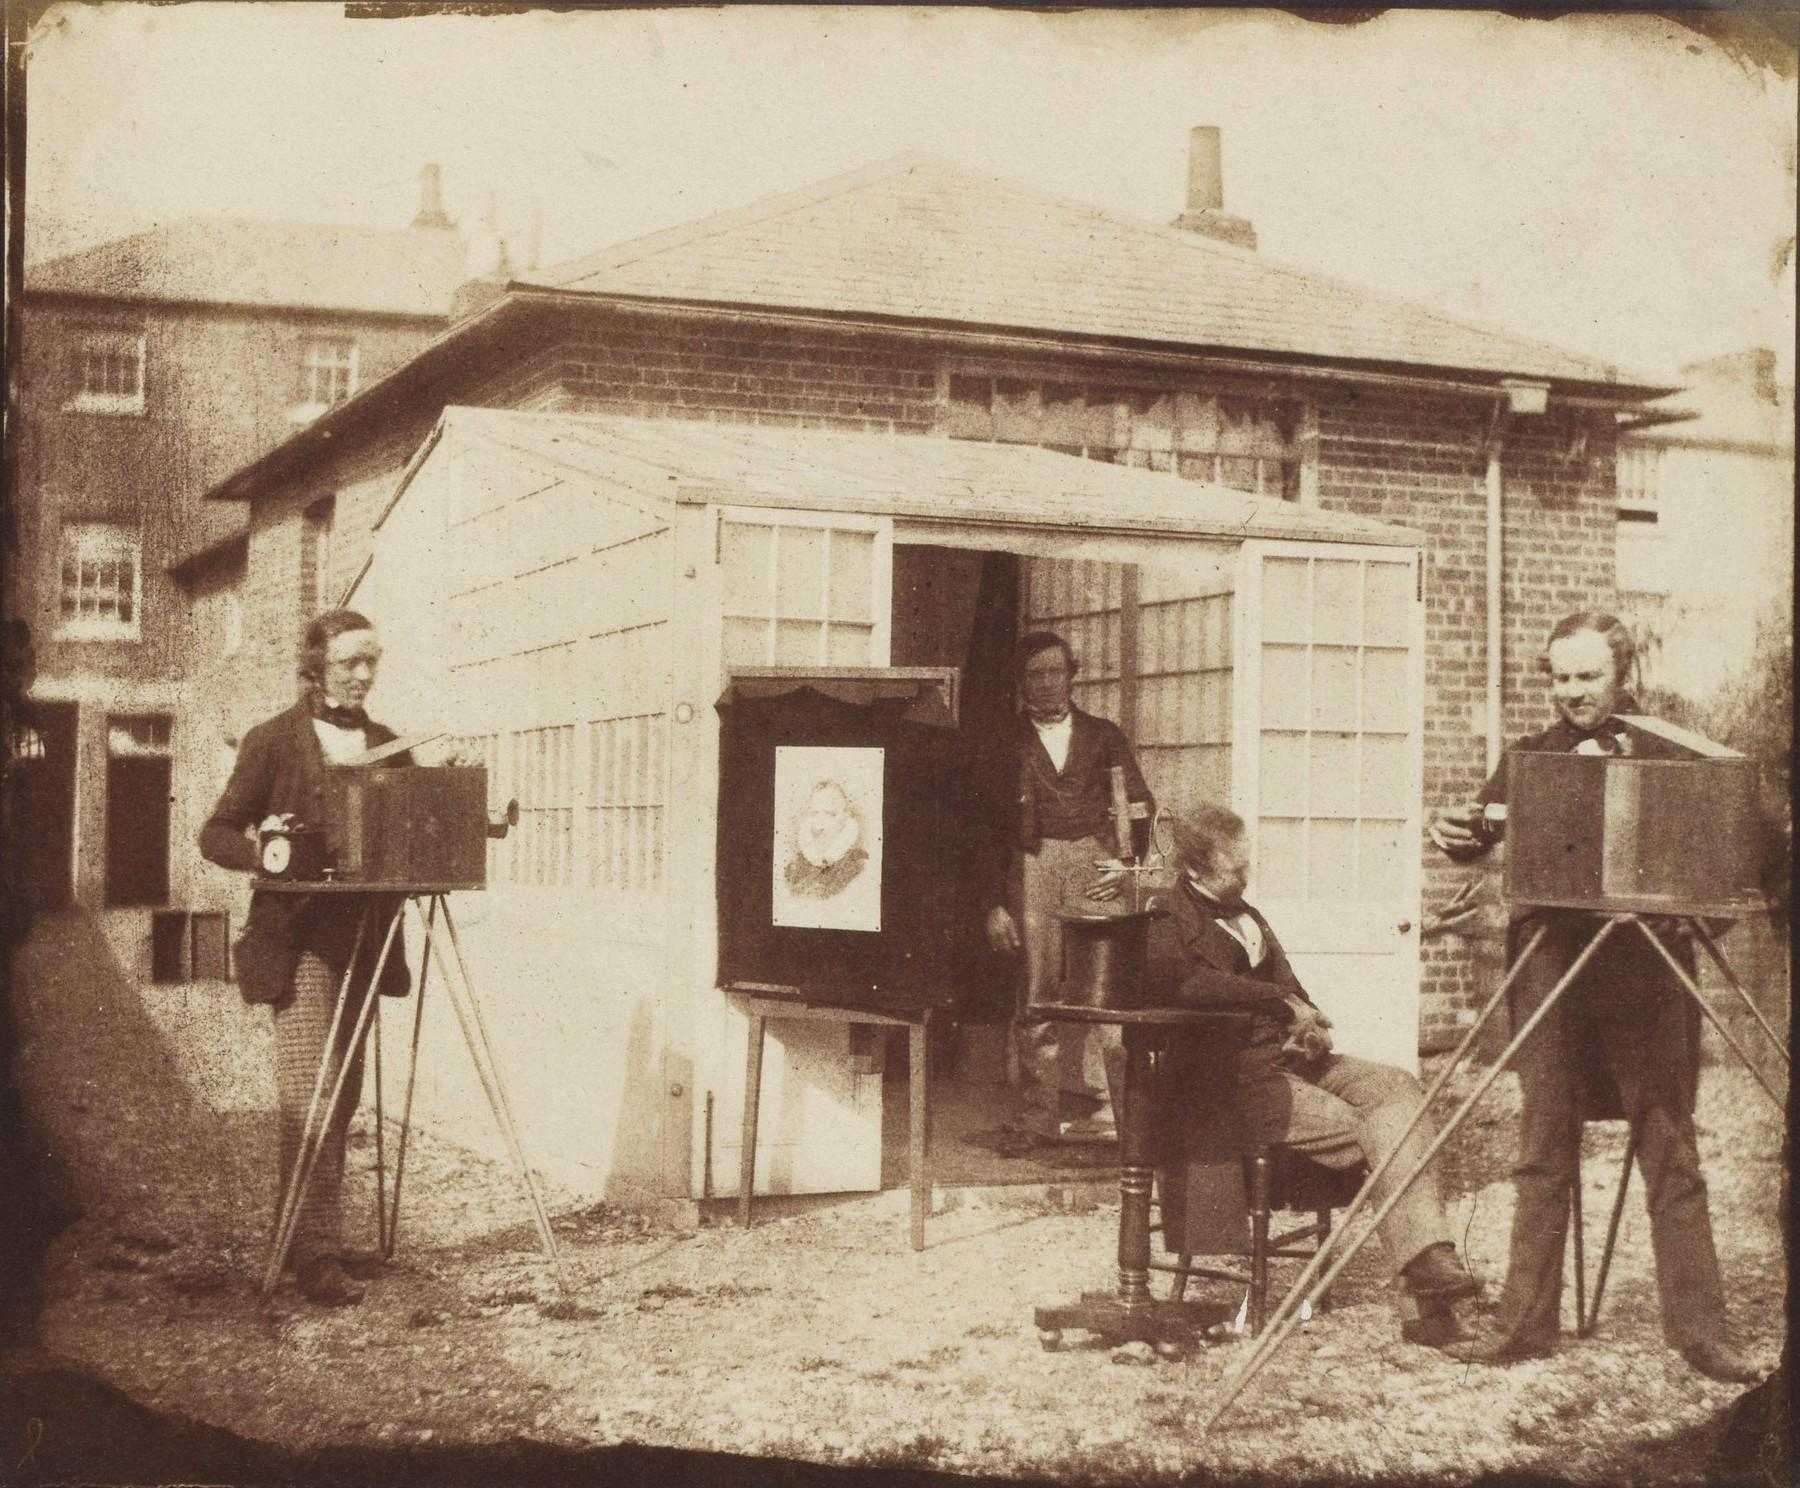 Photographic workshop in Reading, England - 1846.jpeg